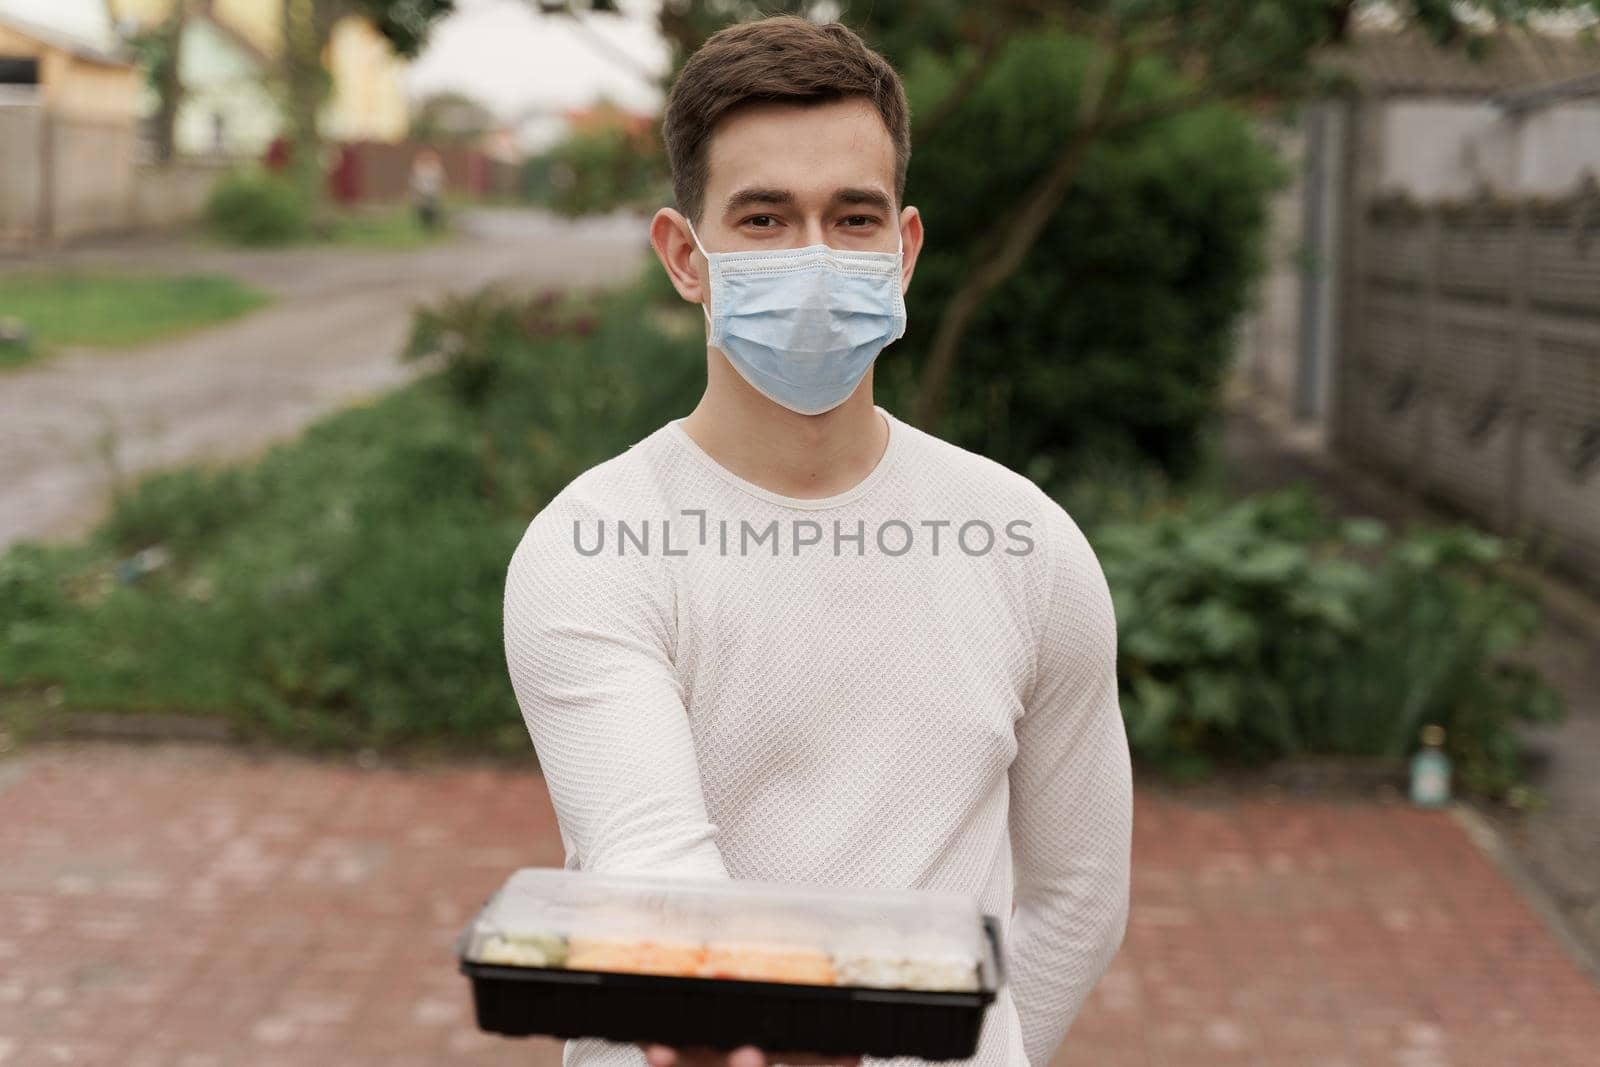 Sushi set in box healthy food delivery online service by car. Handsome man courier in medical mask gives sushi box to you. Japanese cuisine